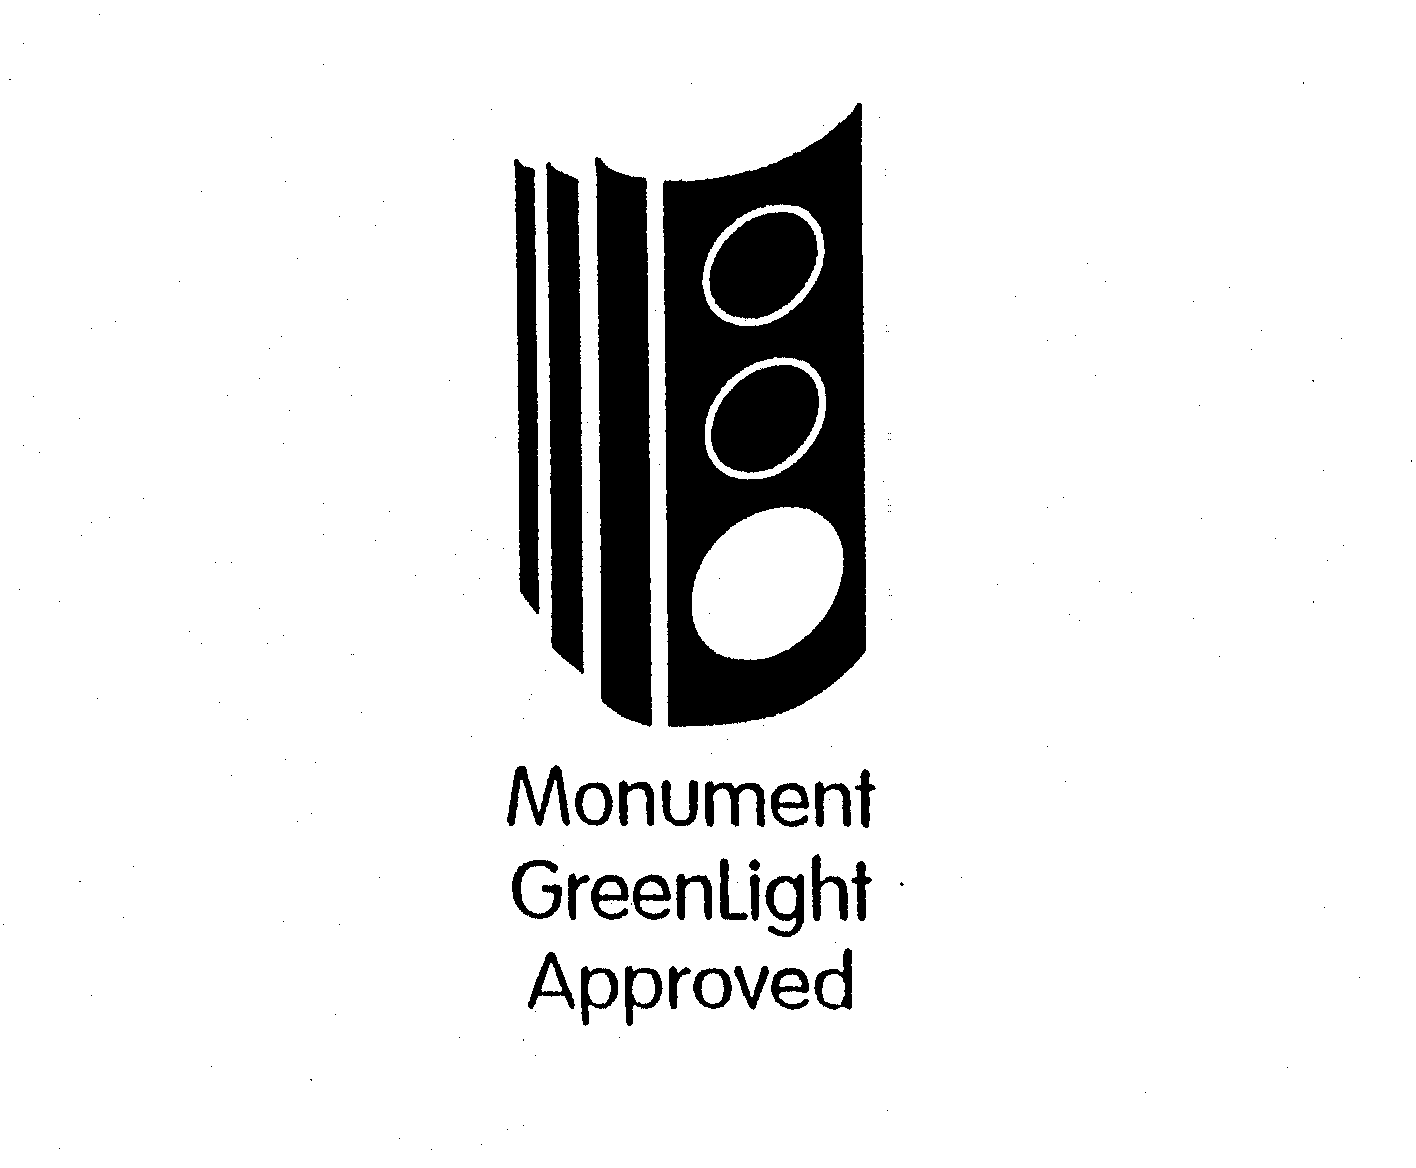  MONUMENT GREENLIGHT APPROVED